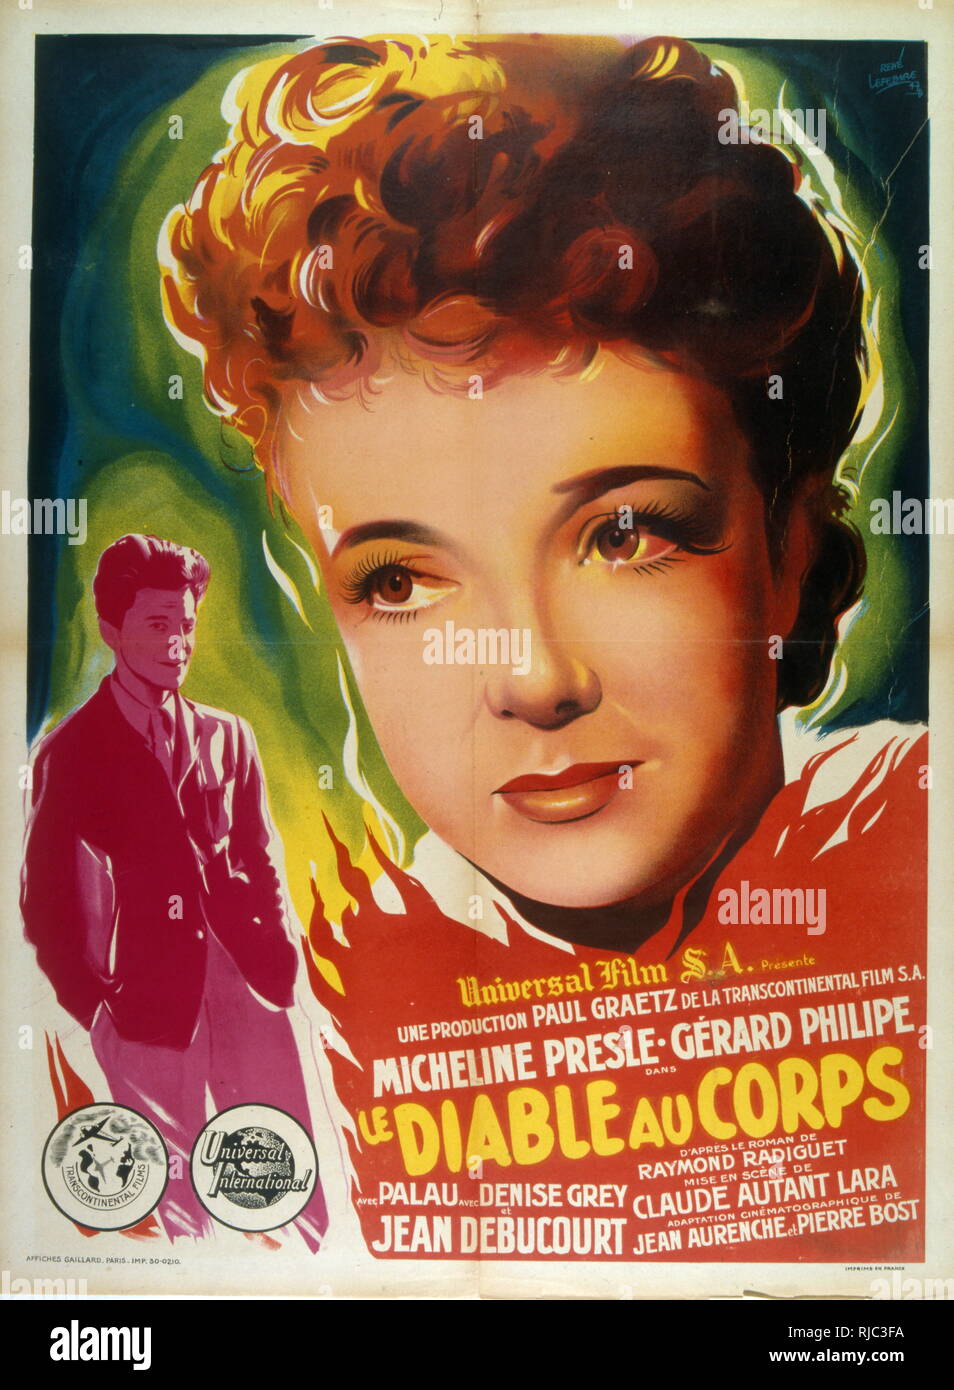 Poster for the French film; Devil in the Flesh (French: Le diable au corps) is a 1947 French movie directed by Claude Autant-Lara starring Micheline Presle and Gerard Philipe. It is based on a novel by Raymond Radiguet Stock Photo